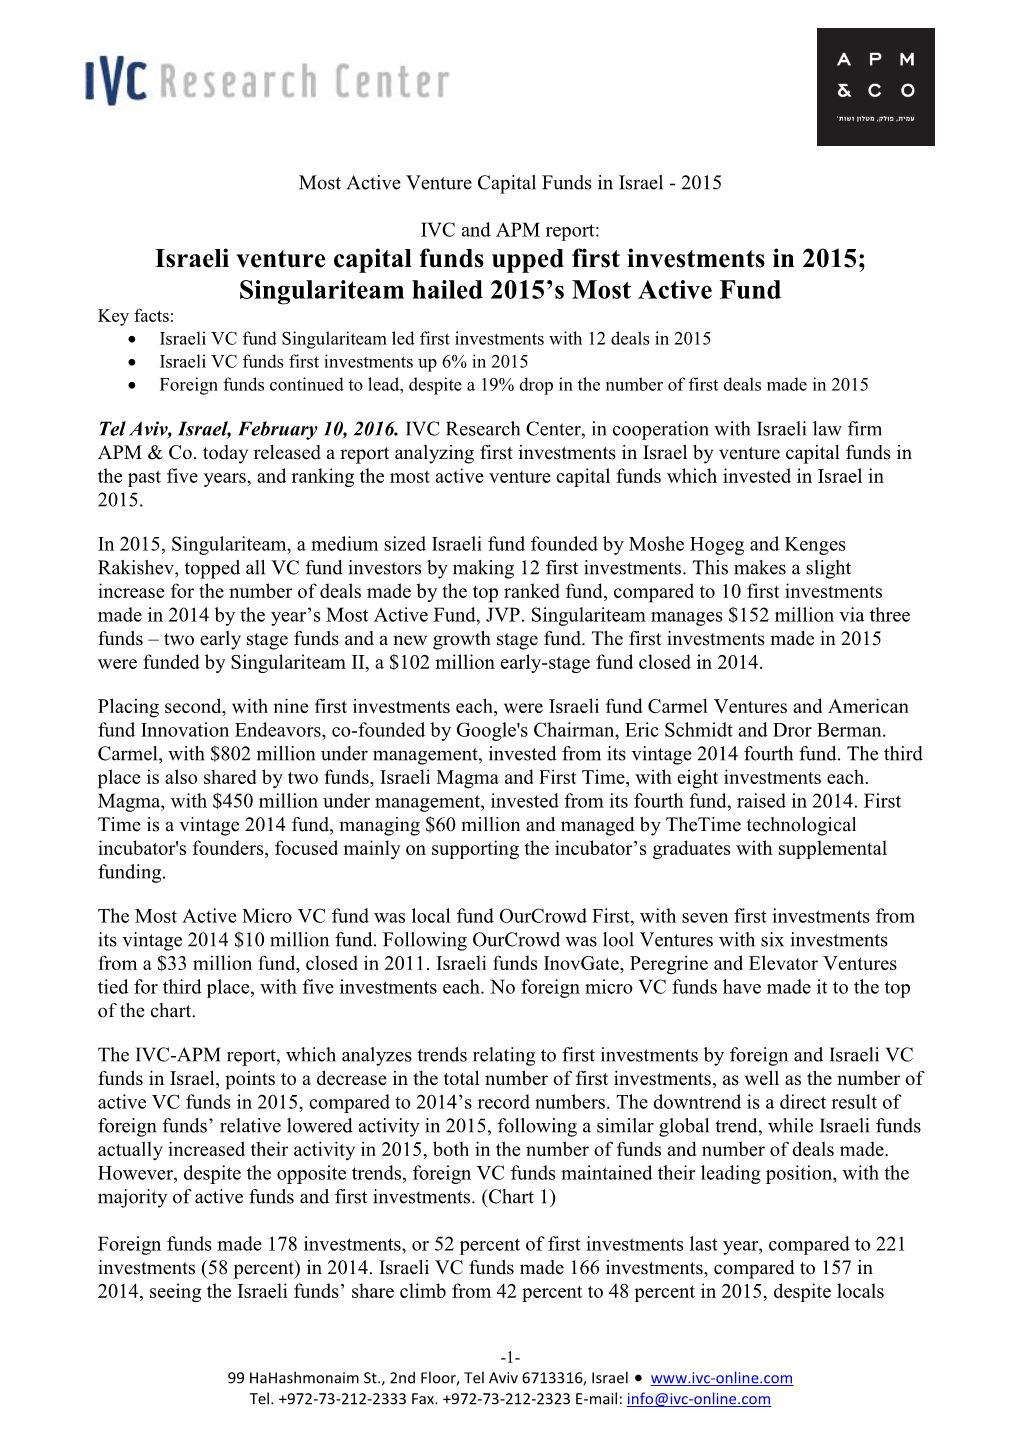 Israeli Venture Capital Funds Upped First Investments in 2015